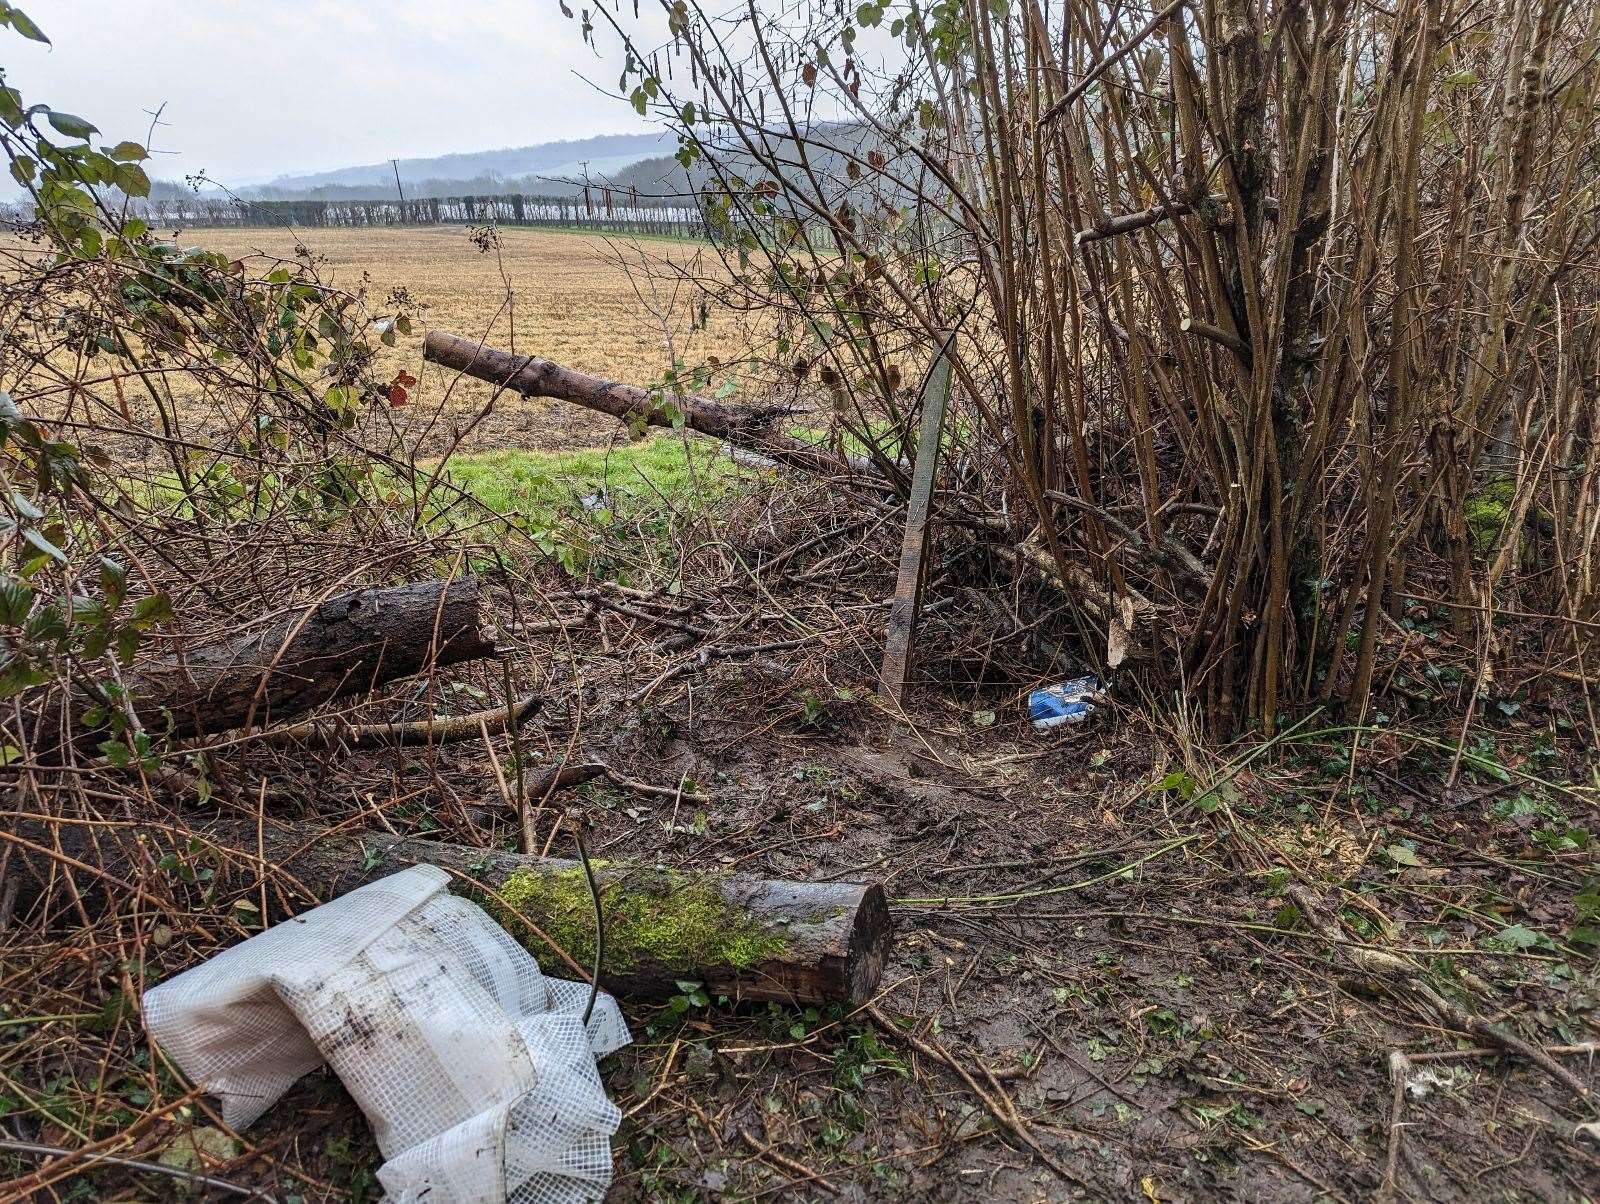 The area where the seriously ill animal was discovered. Picture: RSPCA